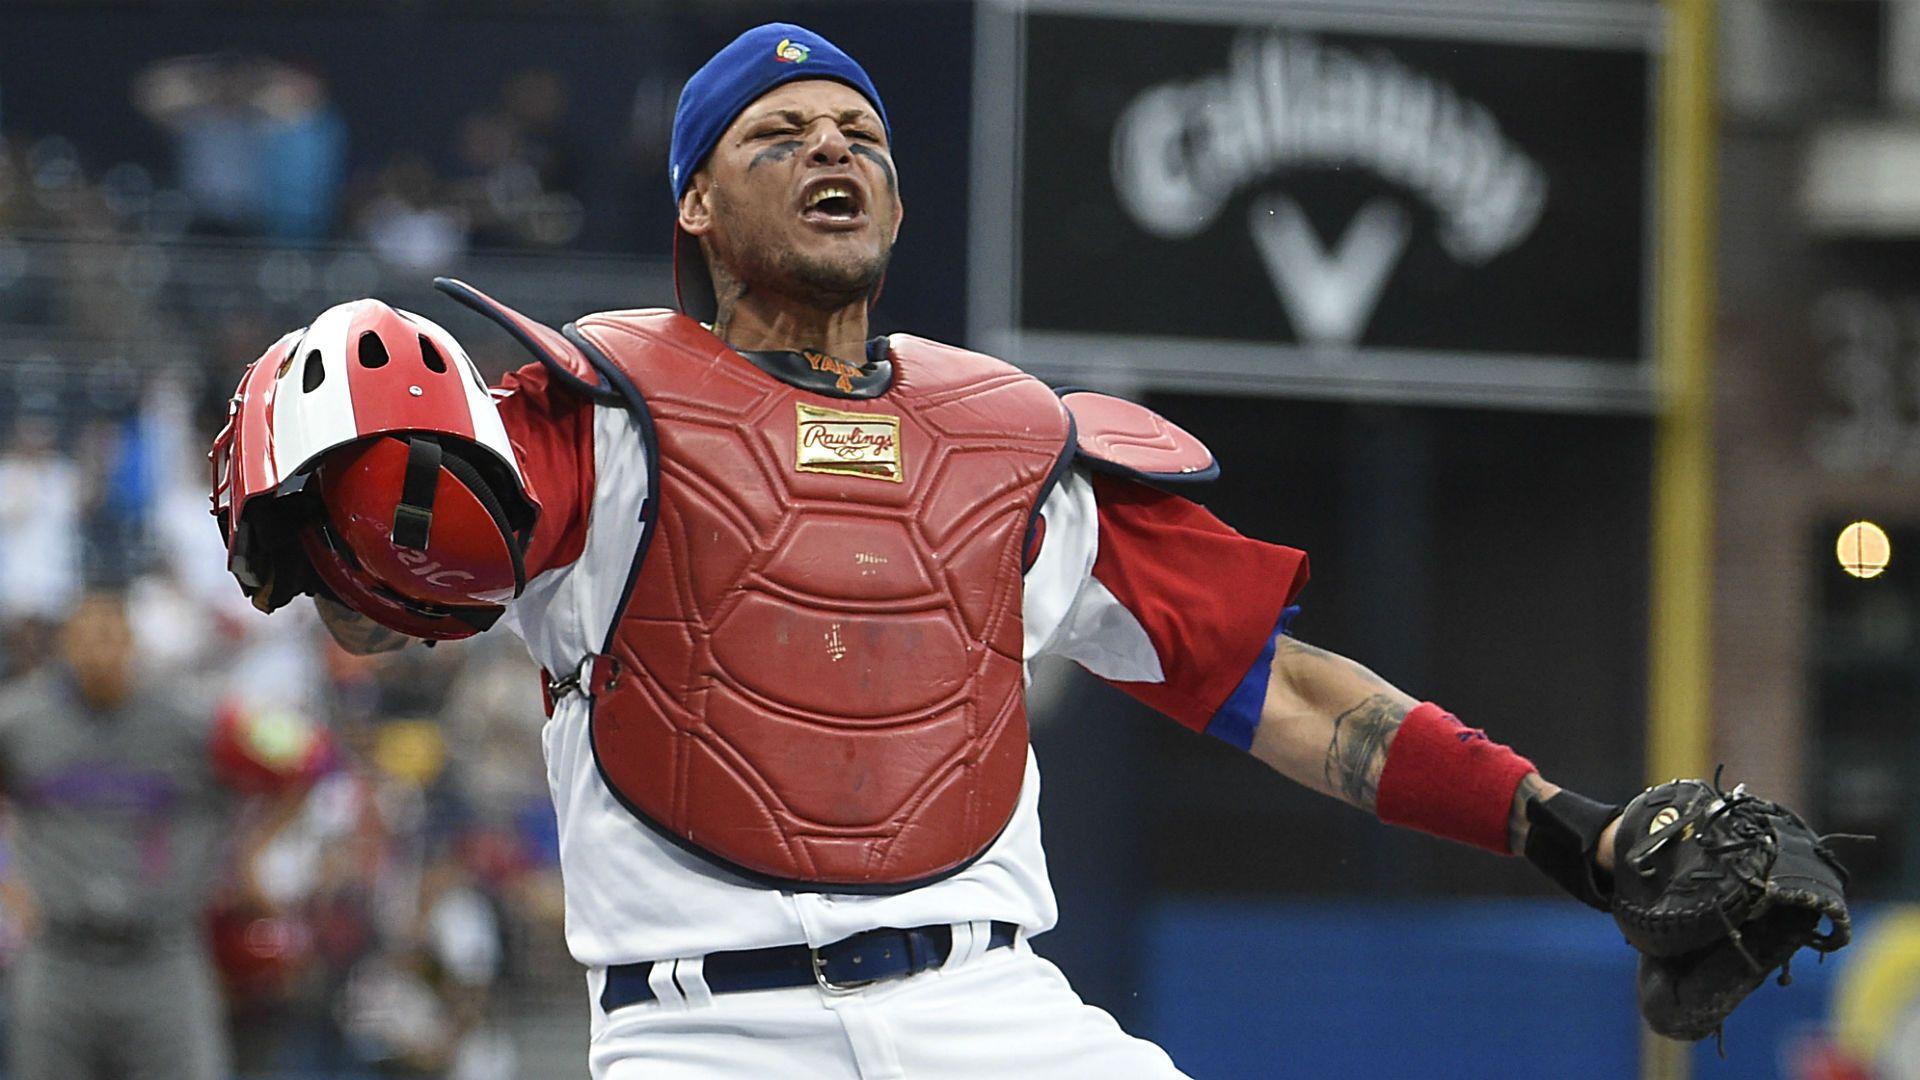 The internet wants to know how a ball got stuck to Yadier Molina's